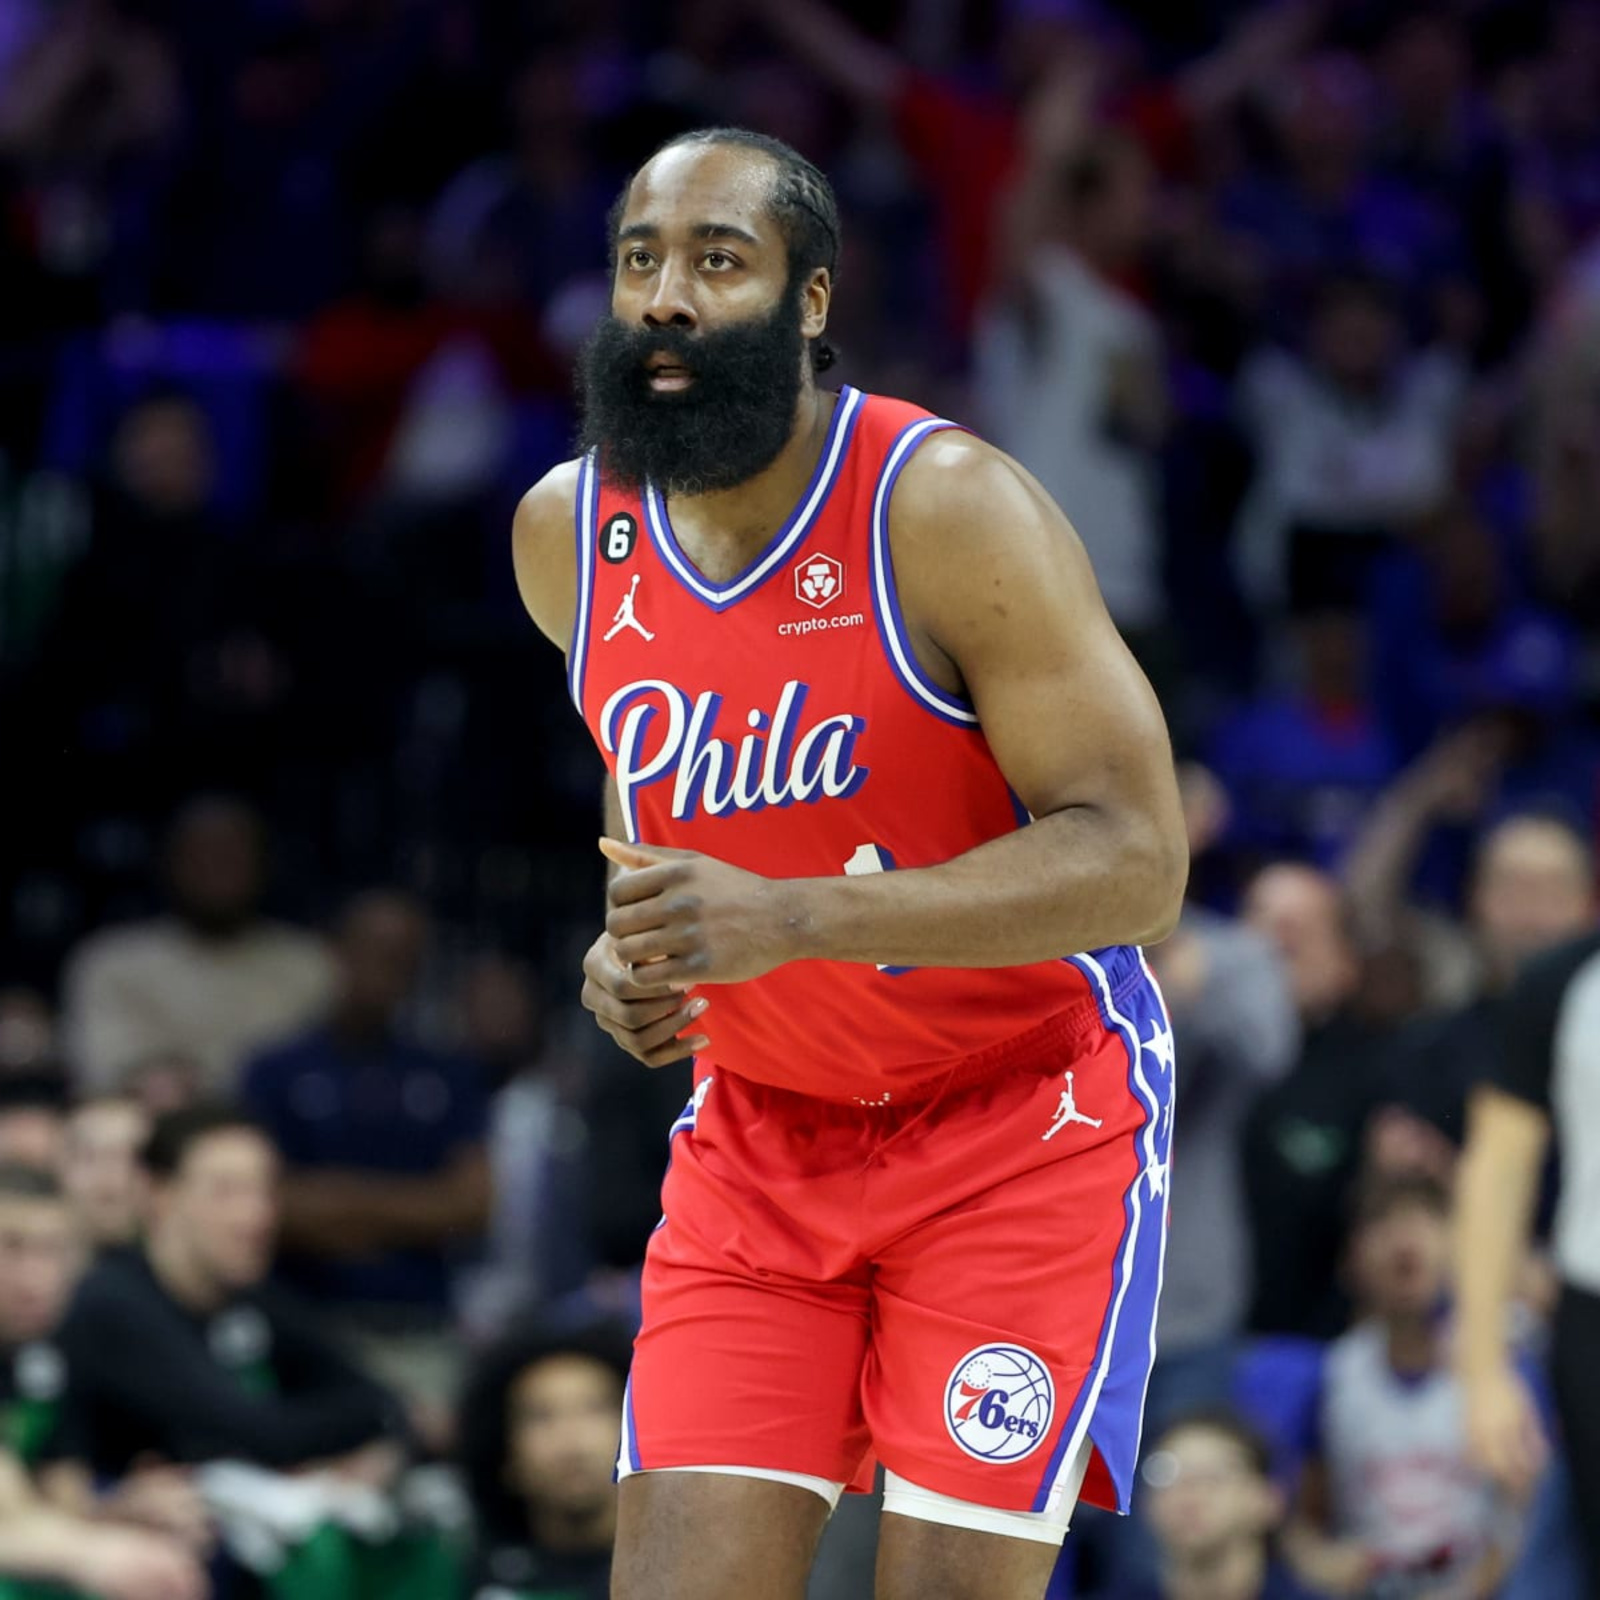 HARDEN MAKES SIXERS FANS SICK: AFRAID TO SHOOT, LIKE SIMMONS